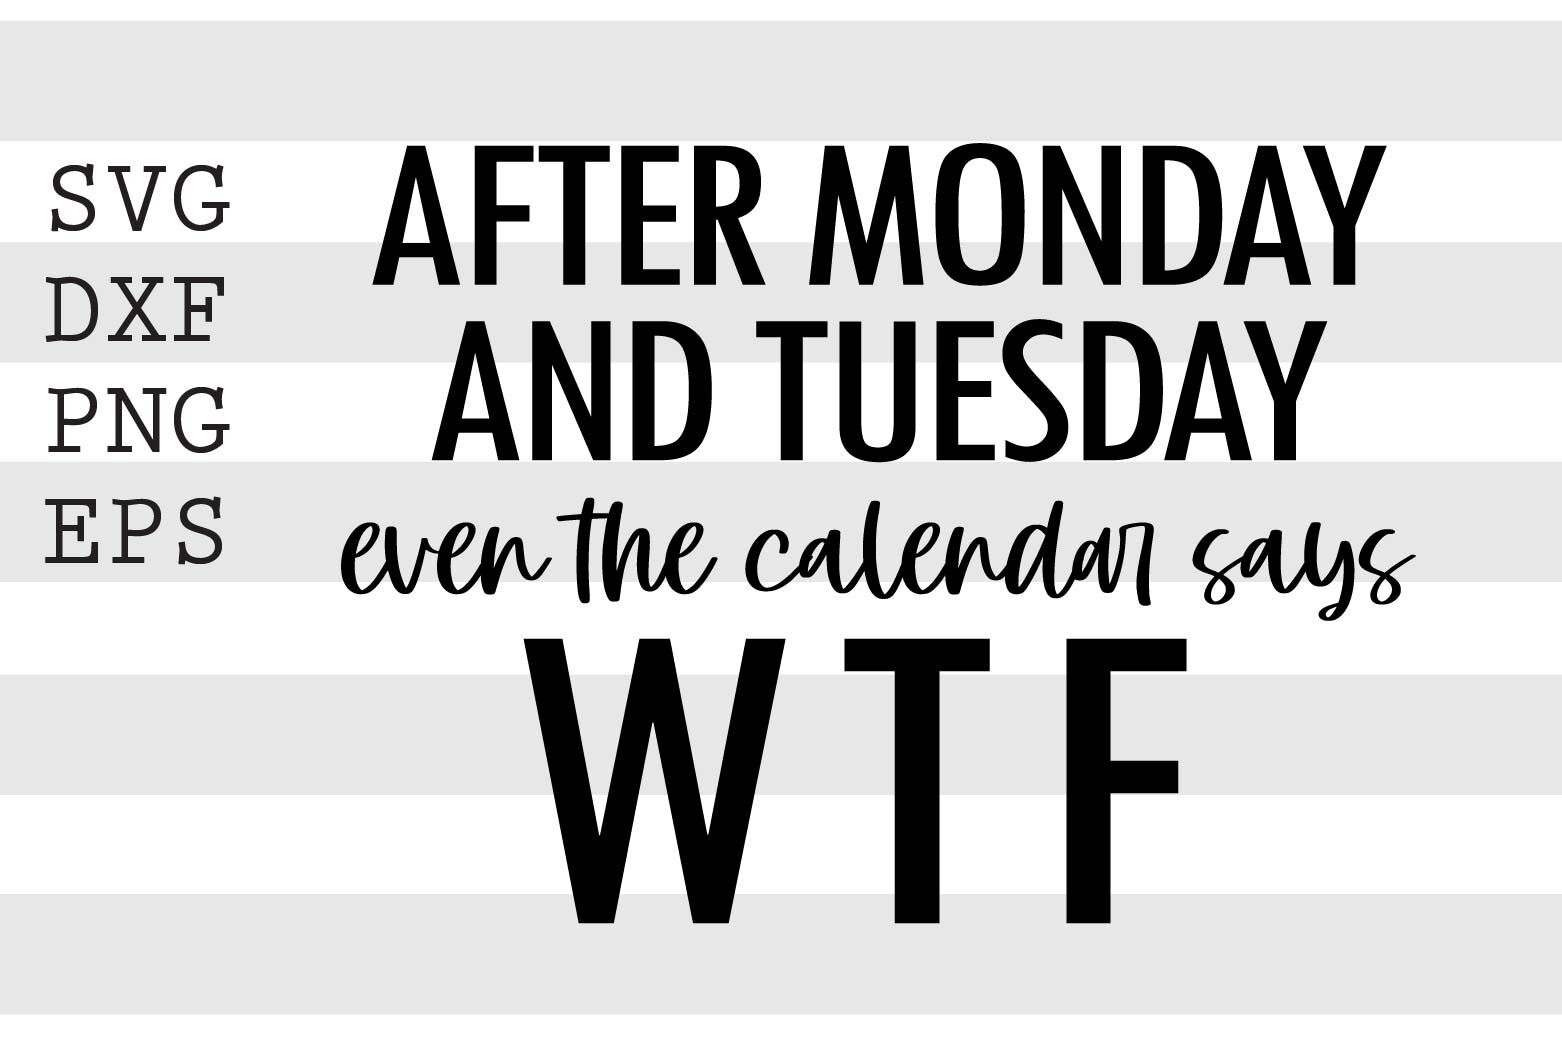 After Monday and Tuesday even the calendar says WTF SVG By spoonyprint